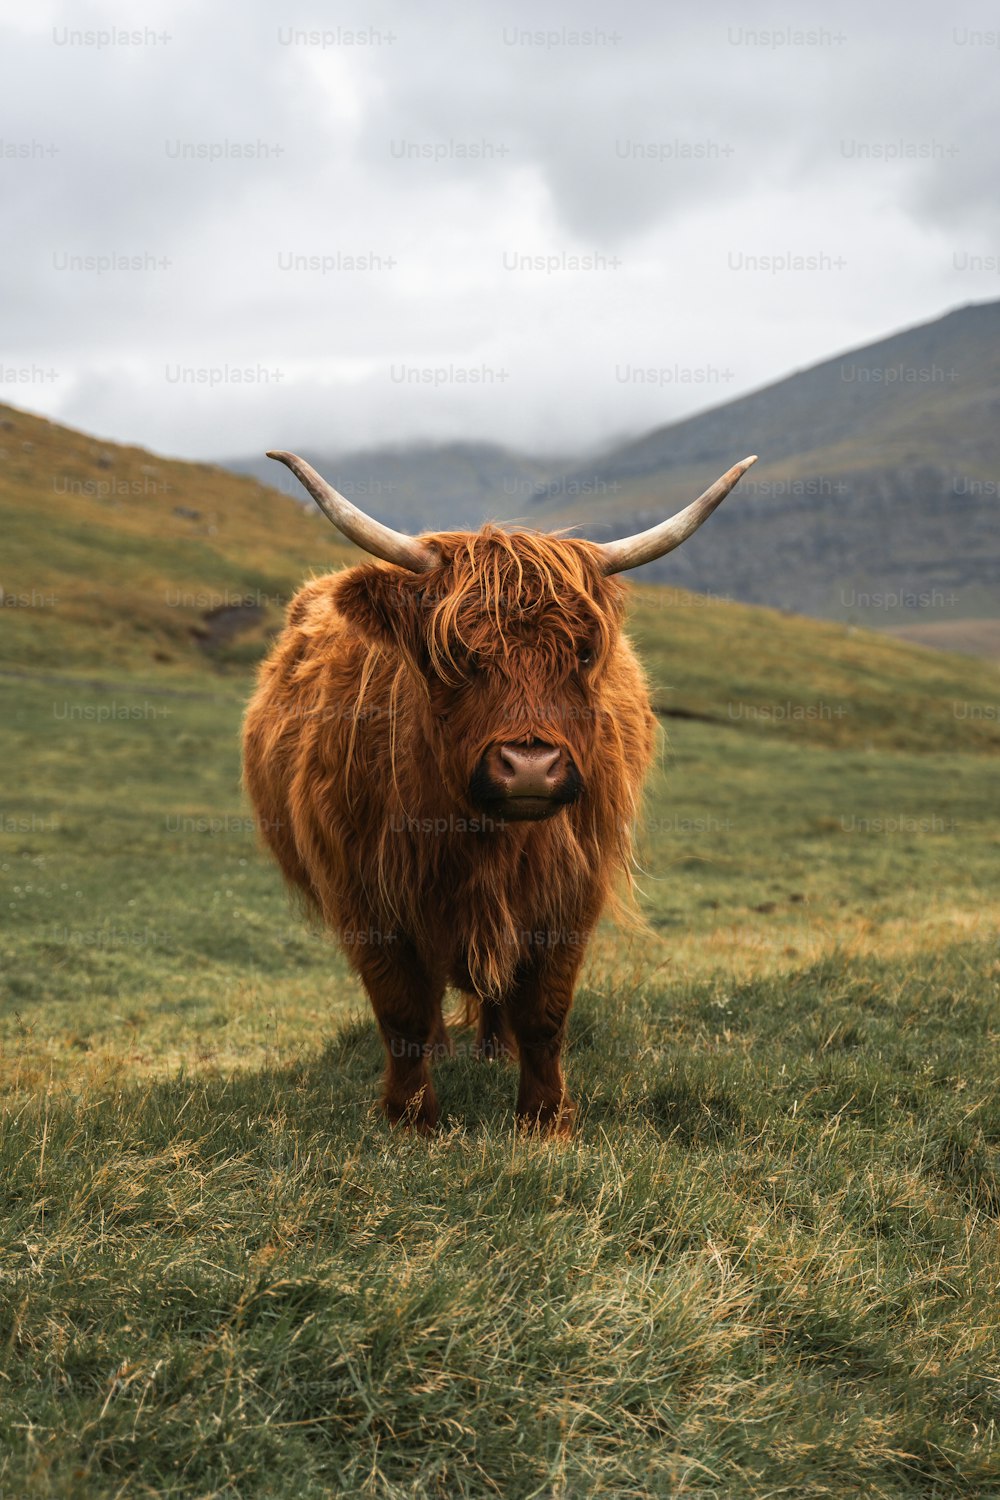 a long haired yak standing in a grassy field